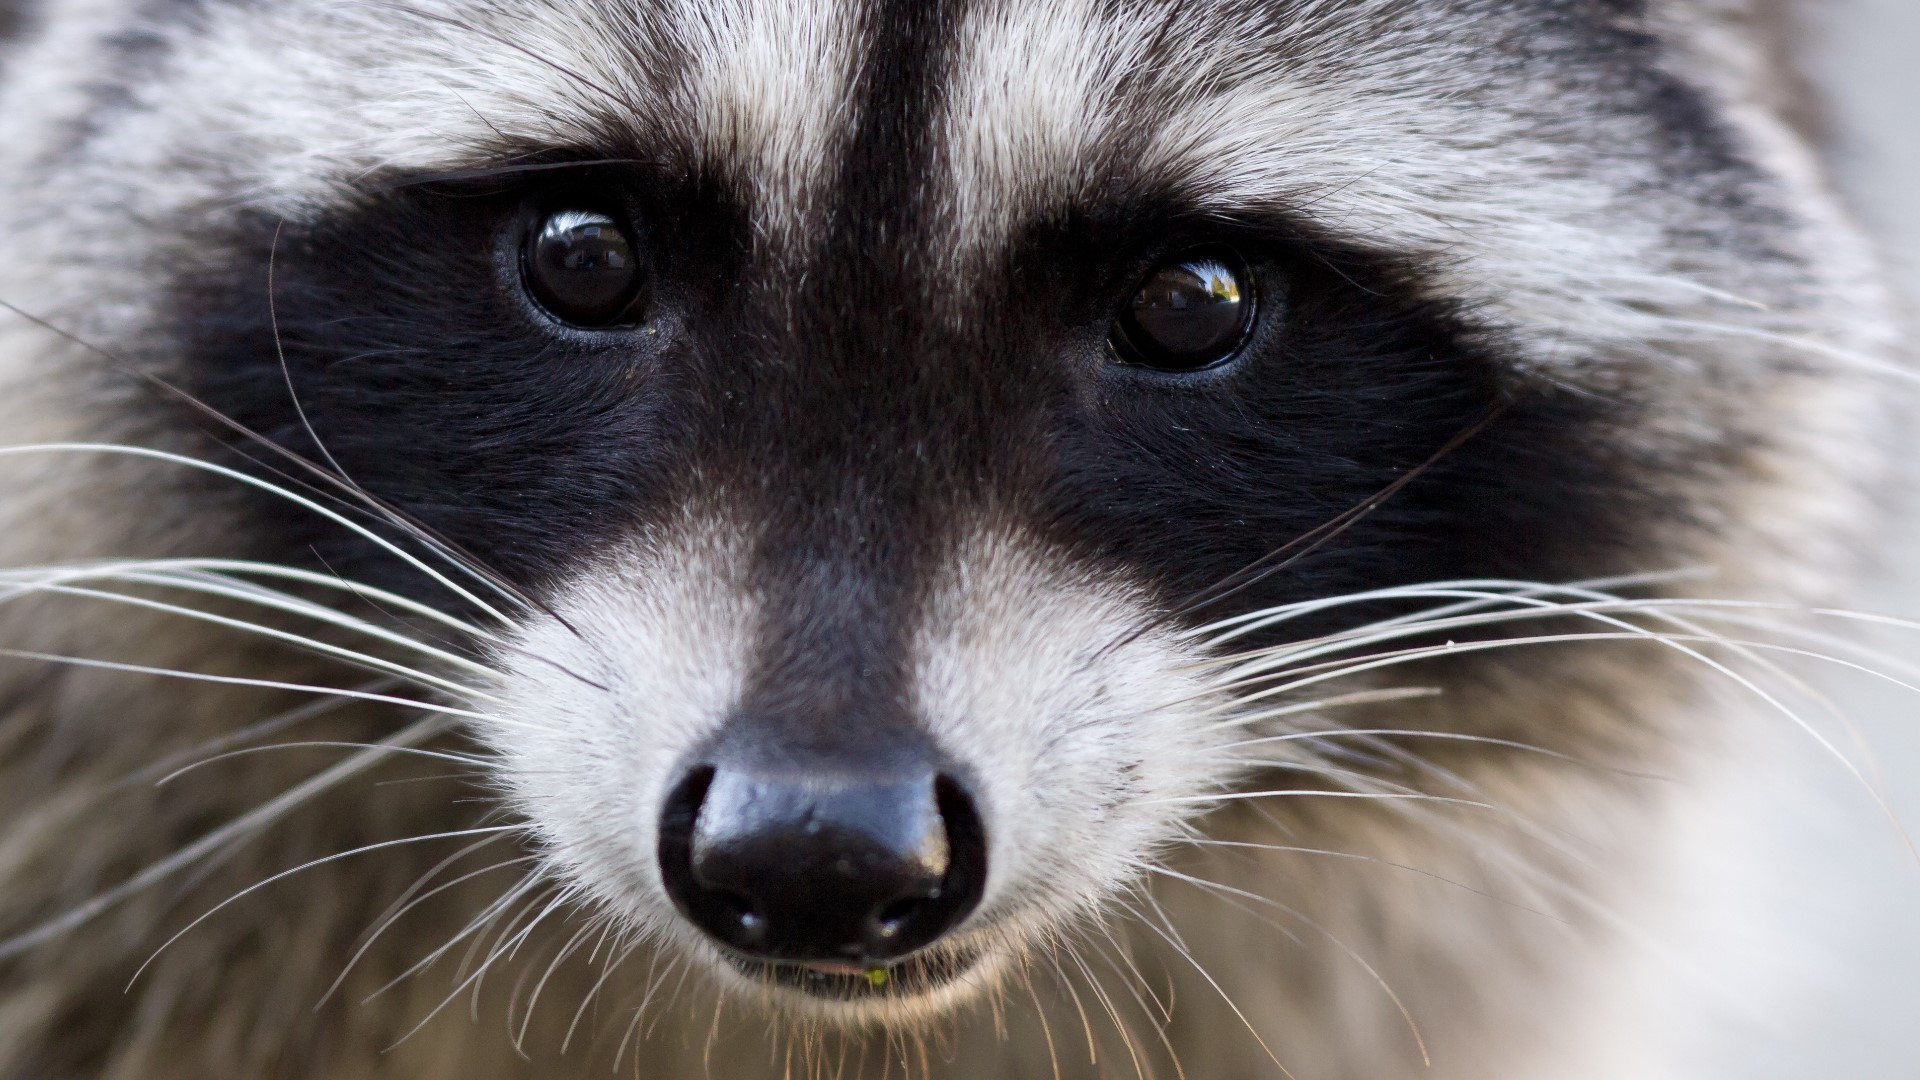 A raccoon came upon guests waiting in line for the SooperDooperLooper roller coaster at Hersheypark, attacking at least two people before scurrying off.